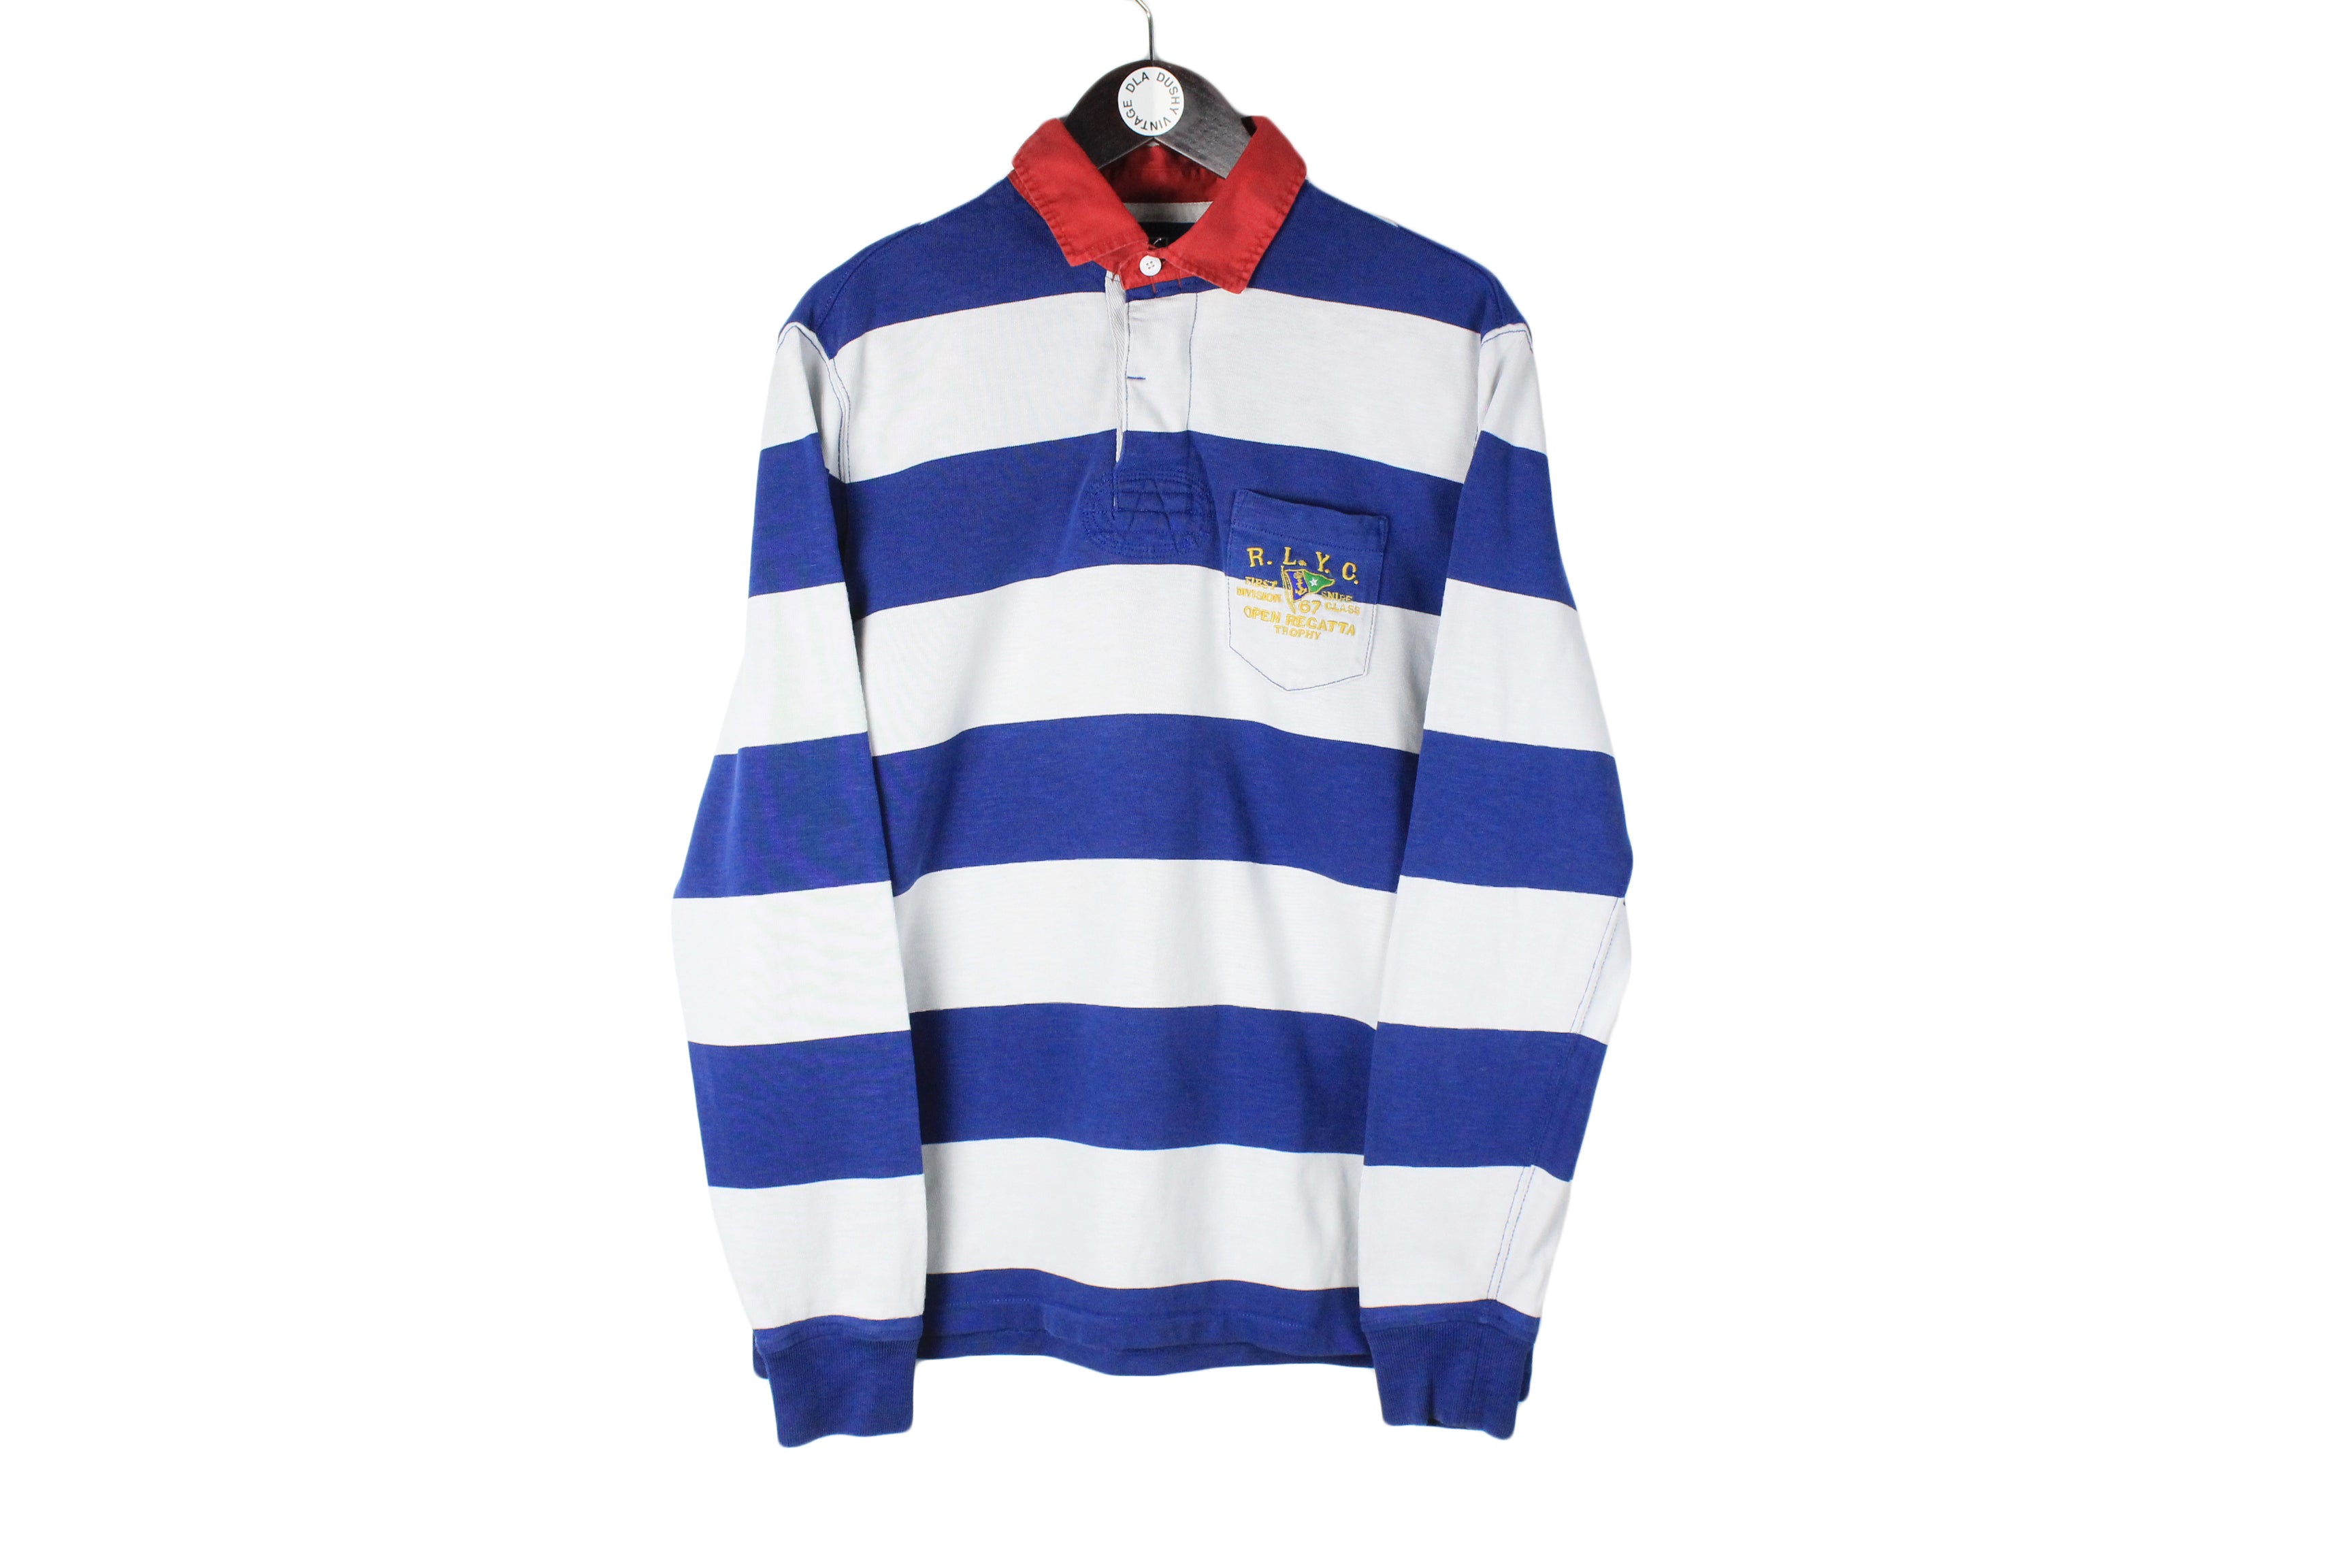 Vintage Polo Ralph Lauren Striped Rugby Longsleeve Polo Shirt 